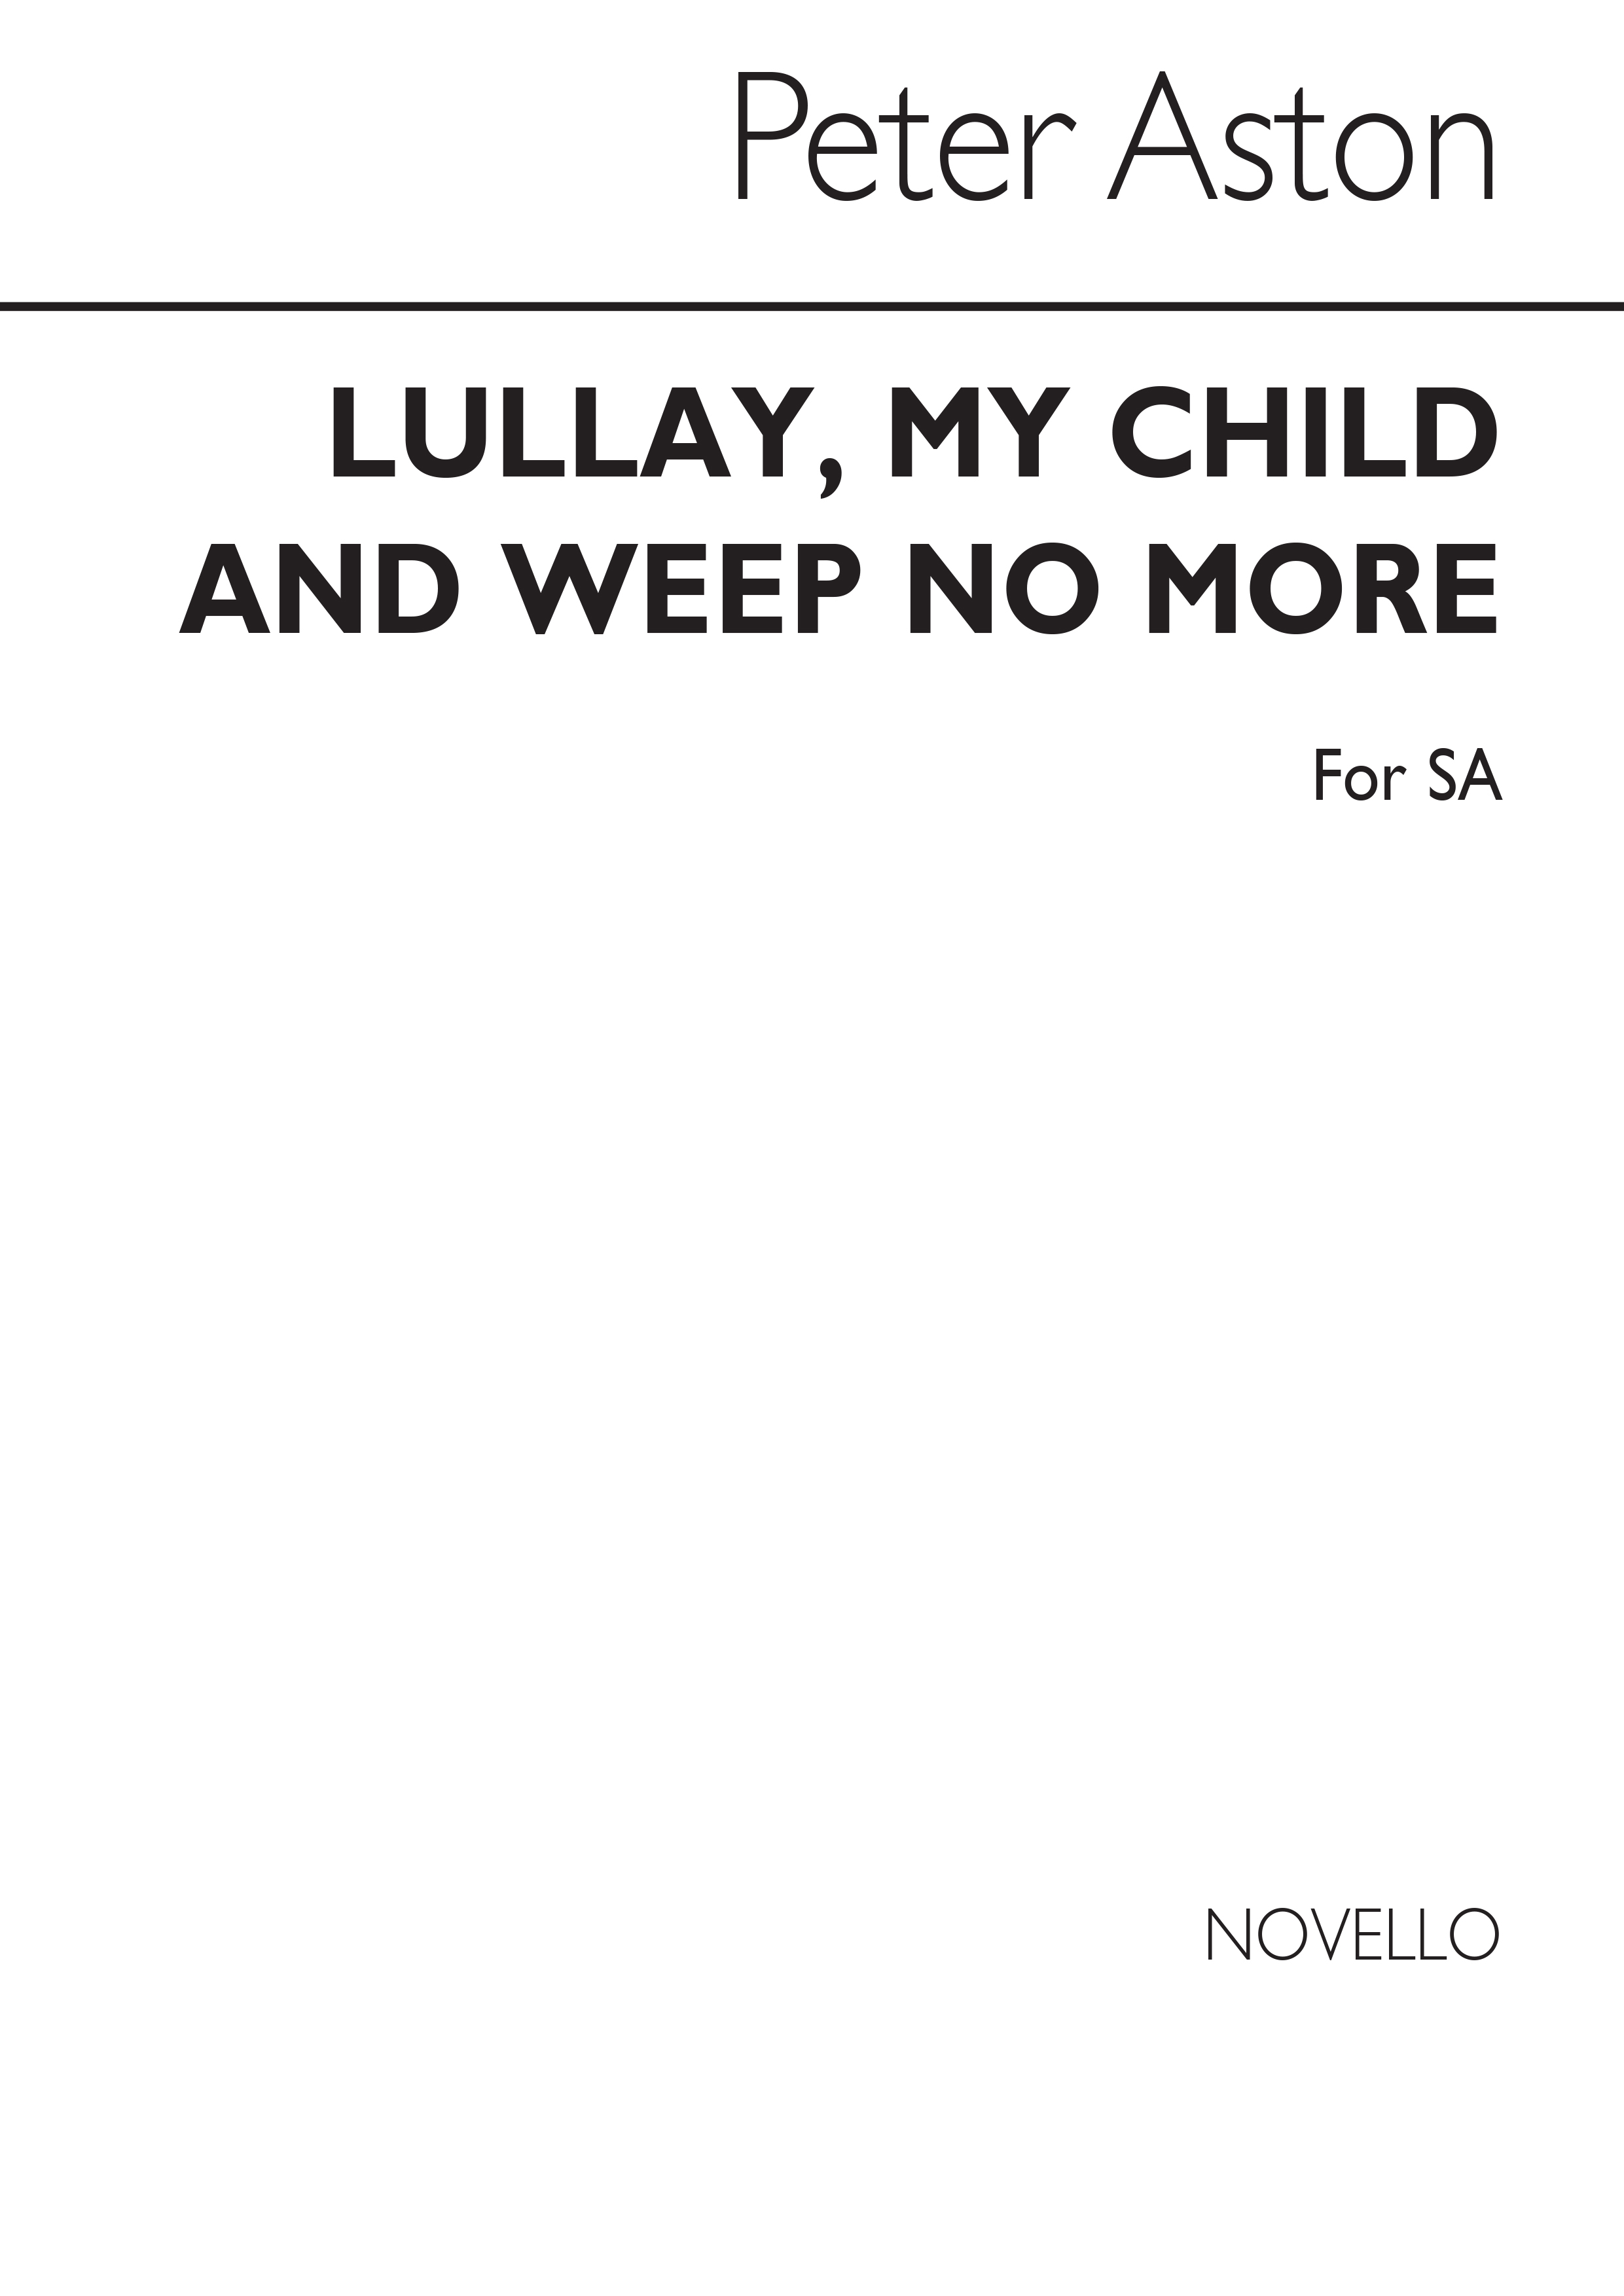 Peter Aston: Lullay My Child And Weep